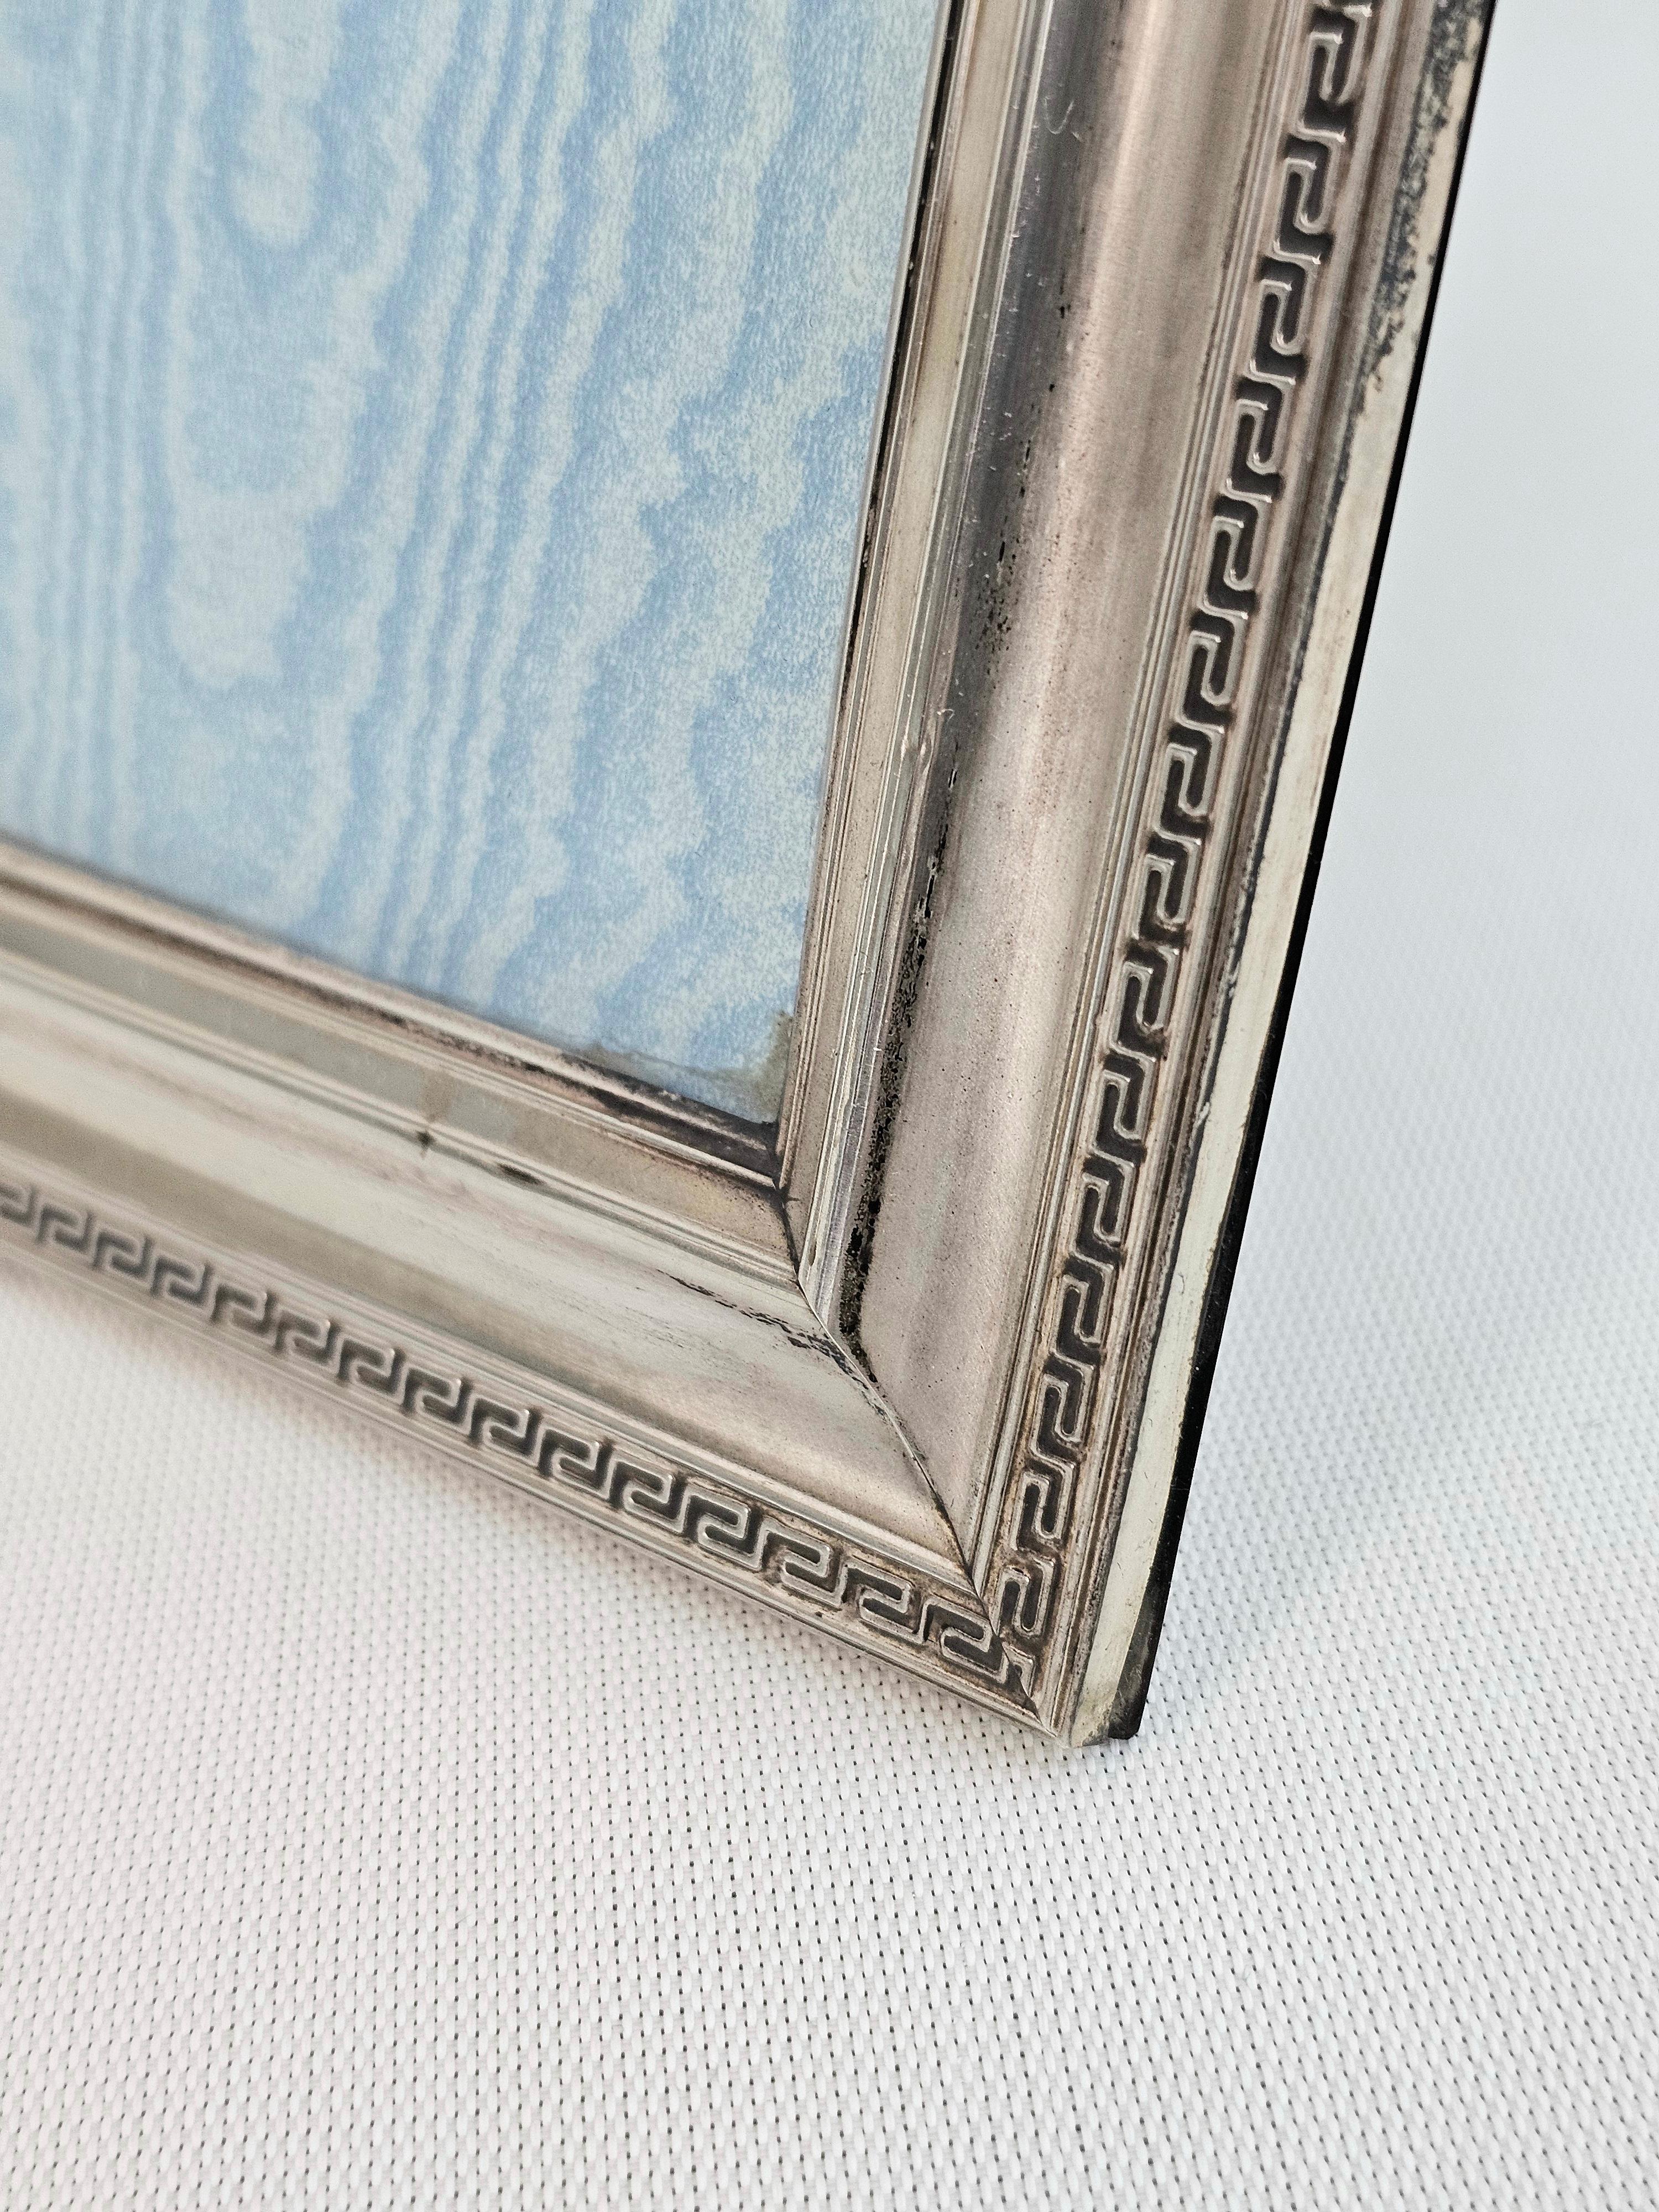 Mid-Century Modern Decorative Object Picture Frame Silver 800 Wood Midcentury Italian Design 1950s For Sale